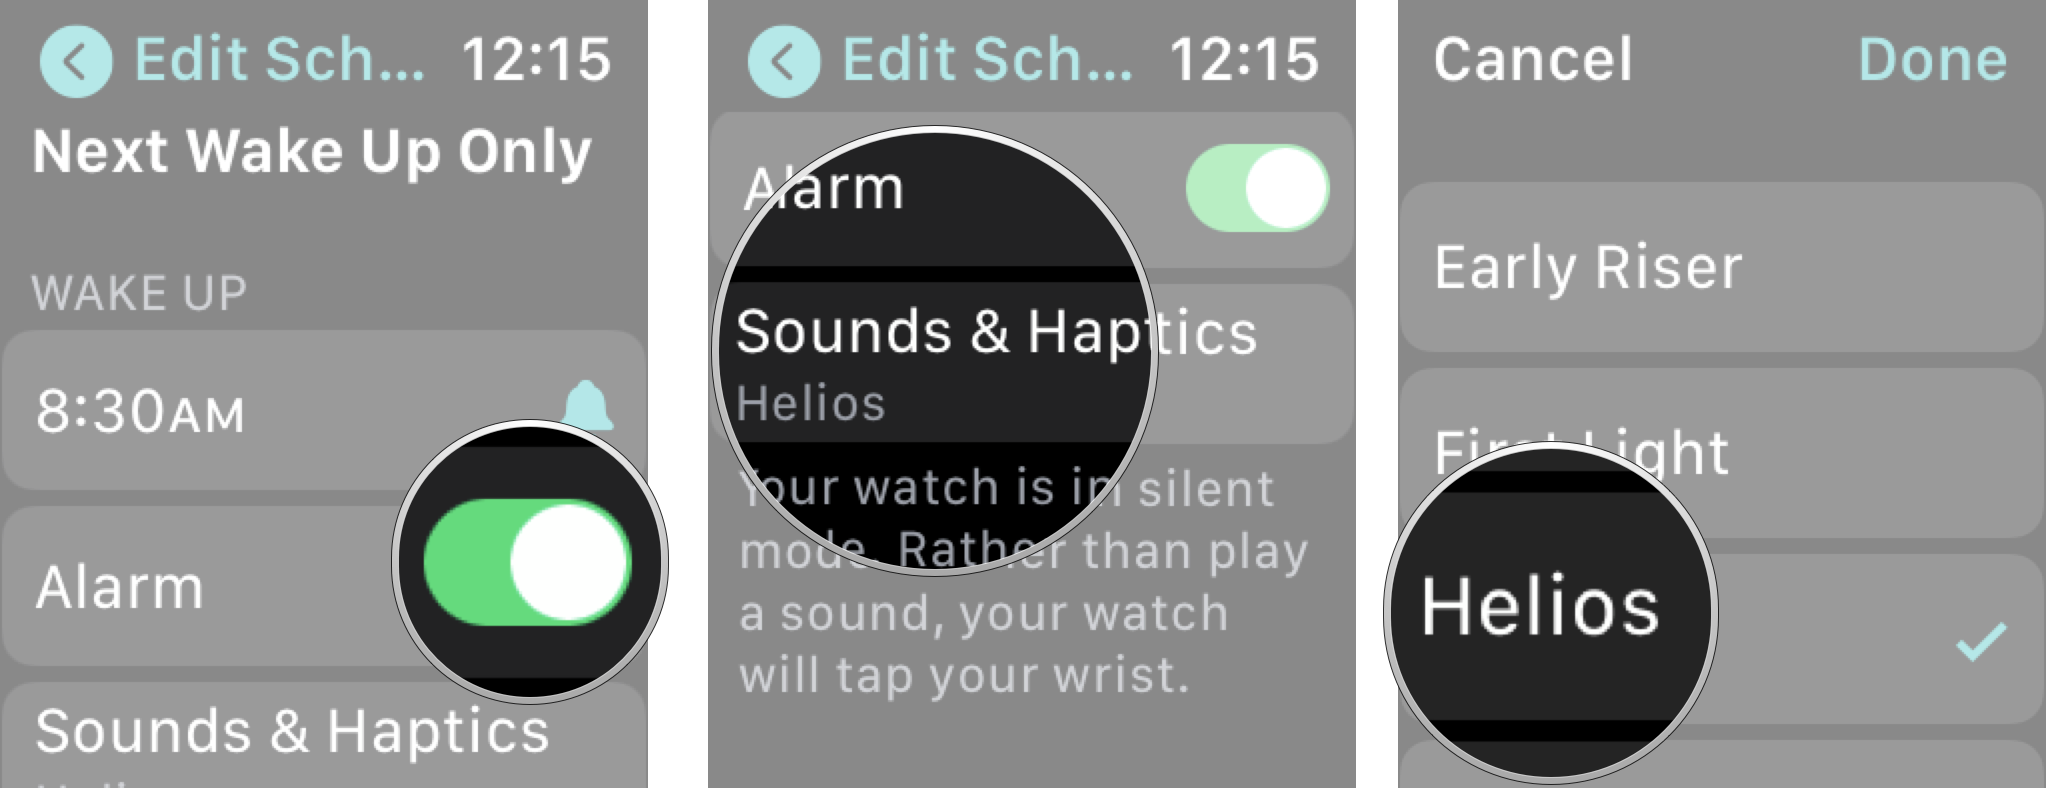 Edit Sleep Schedule In Sleep App On Apple Watch: Tap the alarm on.off switch to toggle the alarm off or on, tap sound and haptics, tap the sound you want. 